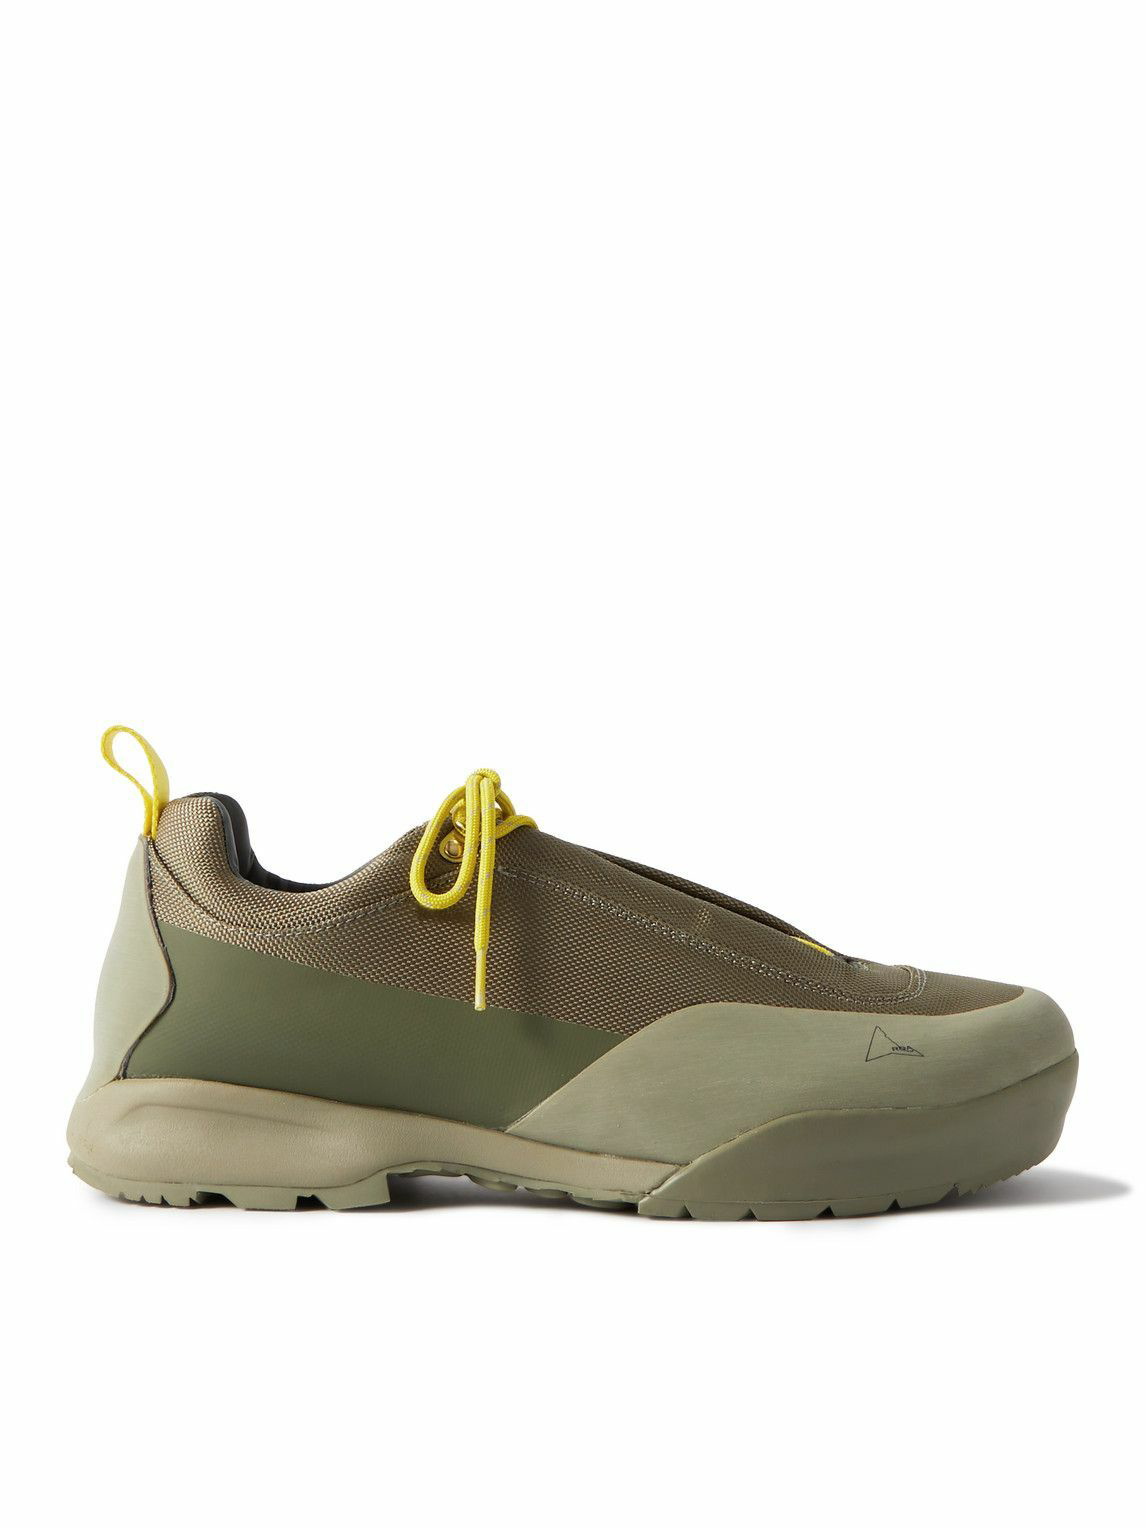 ROA - Rubber and Canvas-Trimmed Mesh Hiking Sneakers - Green ROA